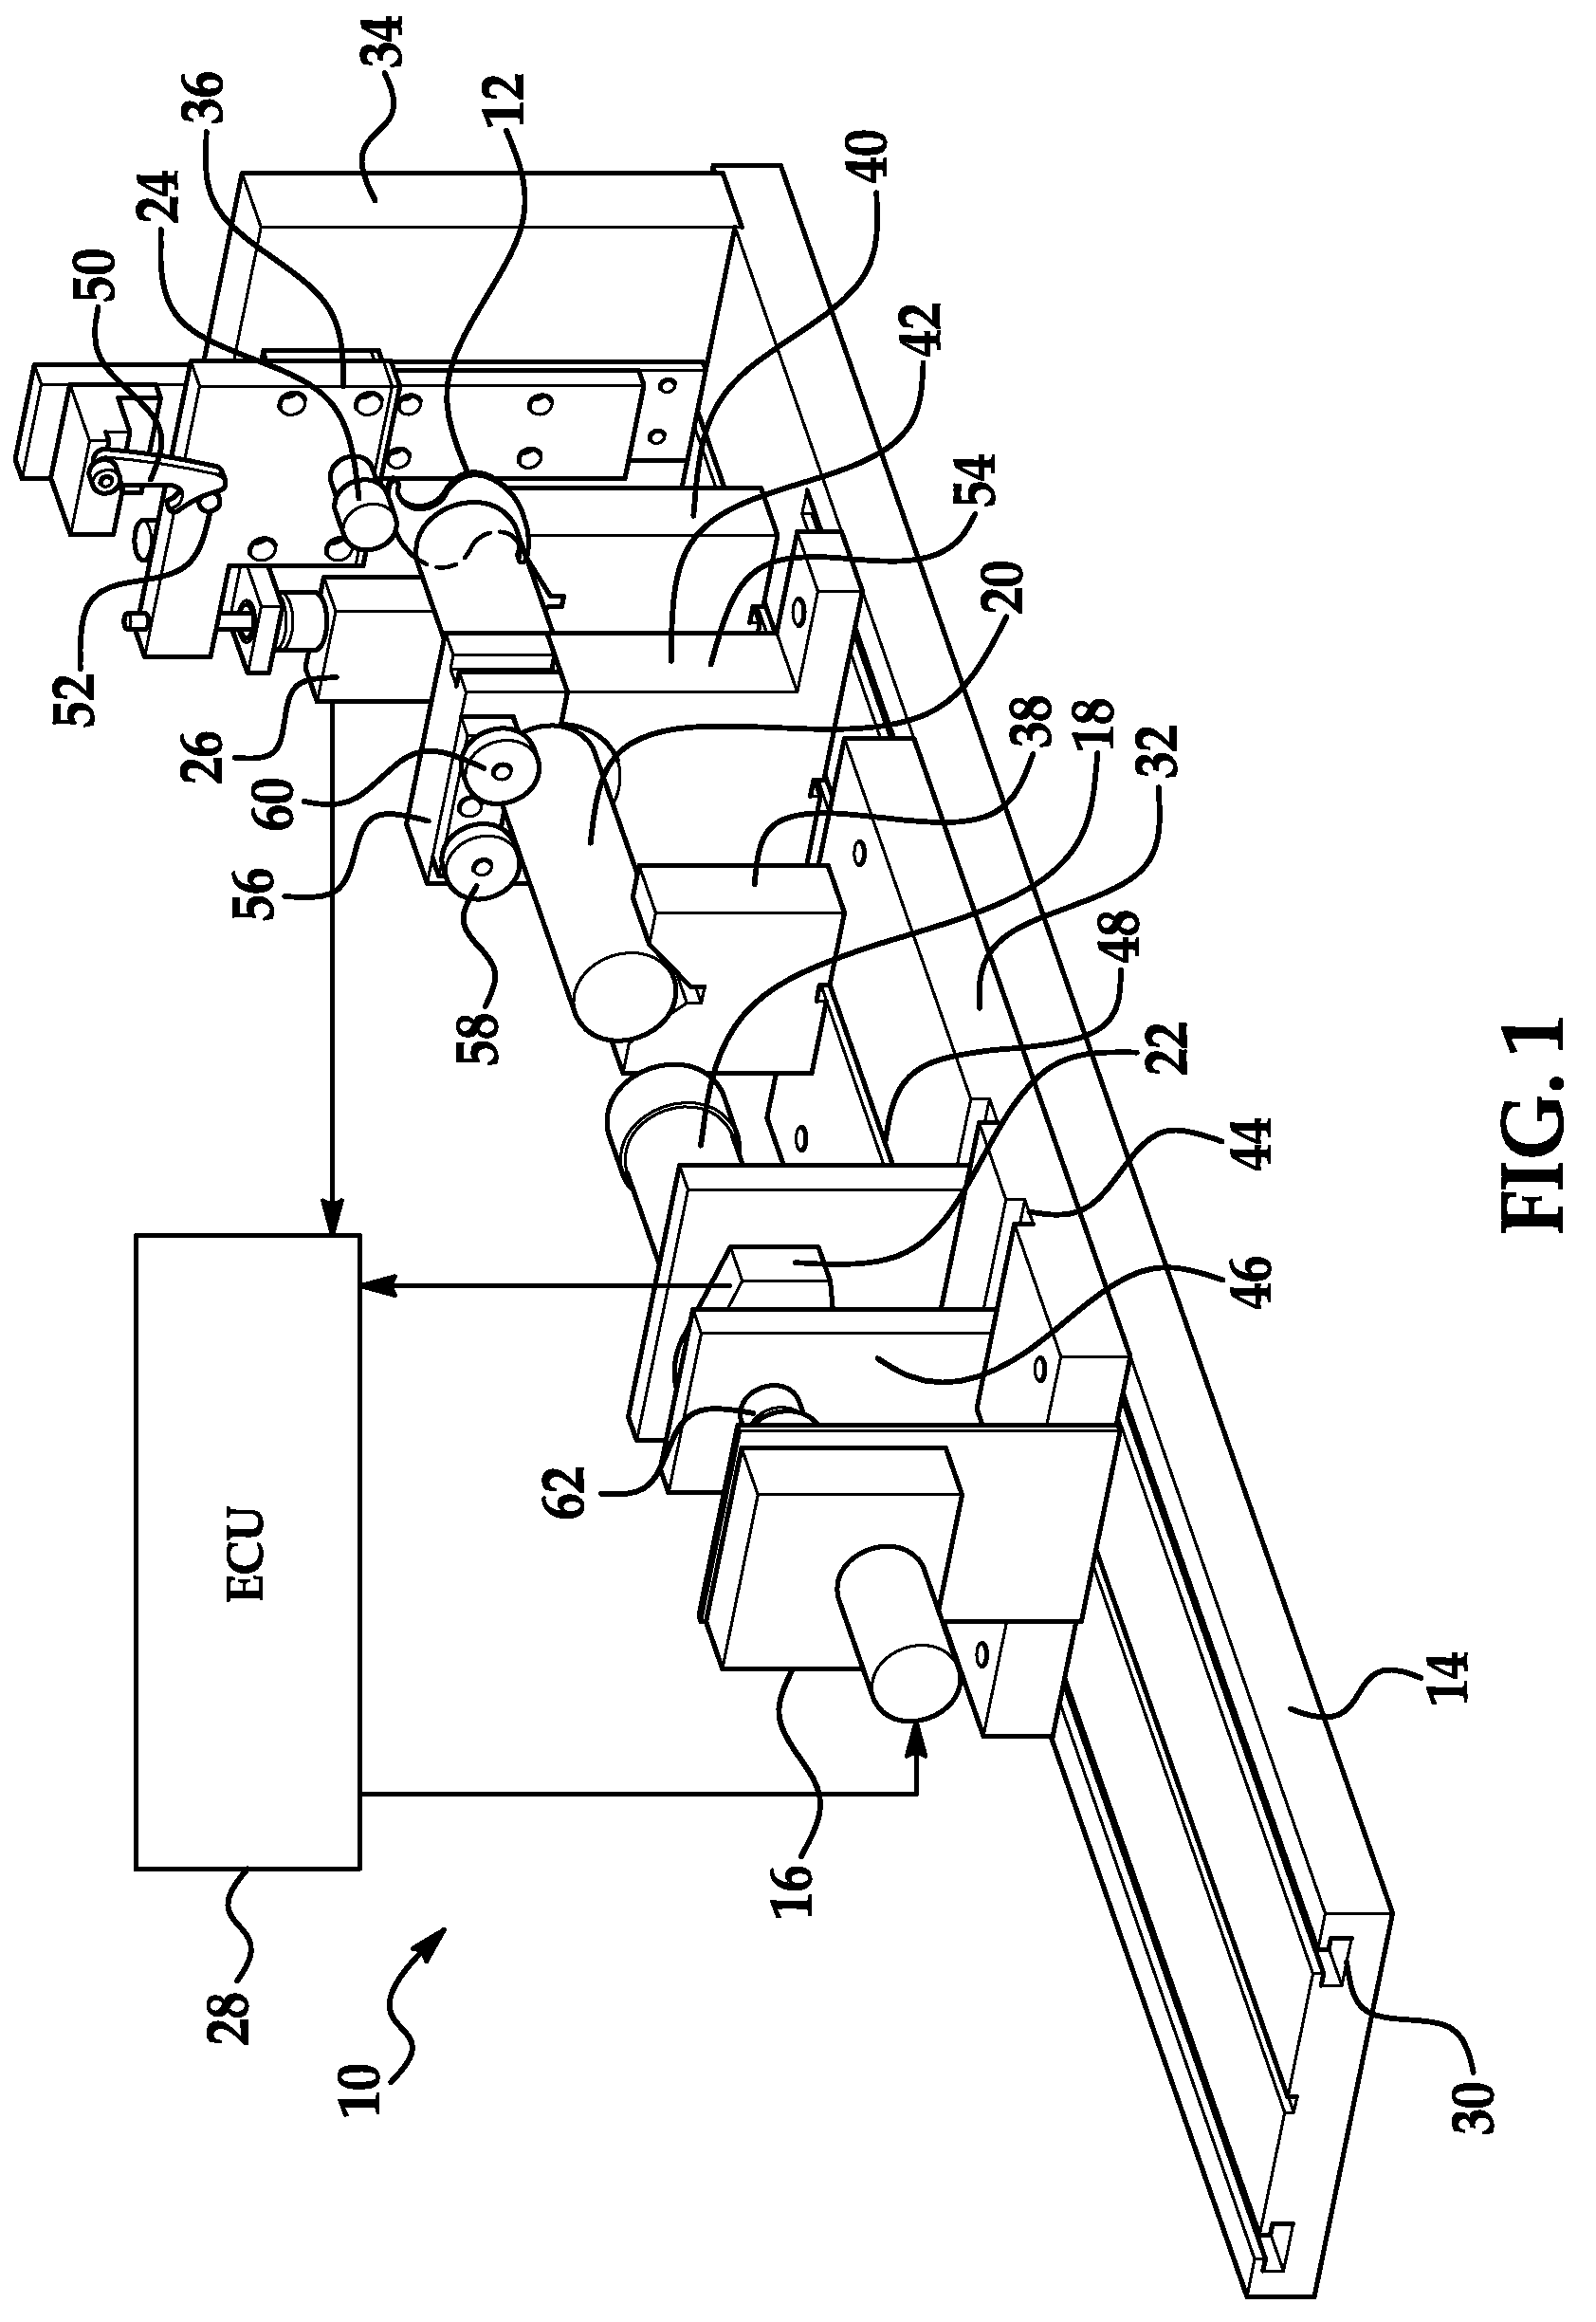 Method and system for evaluating characteristics of an S-cam